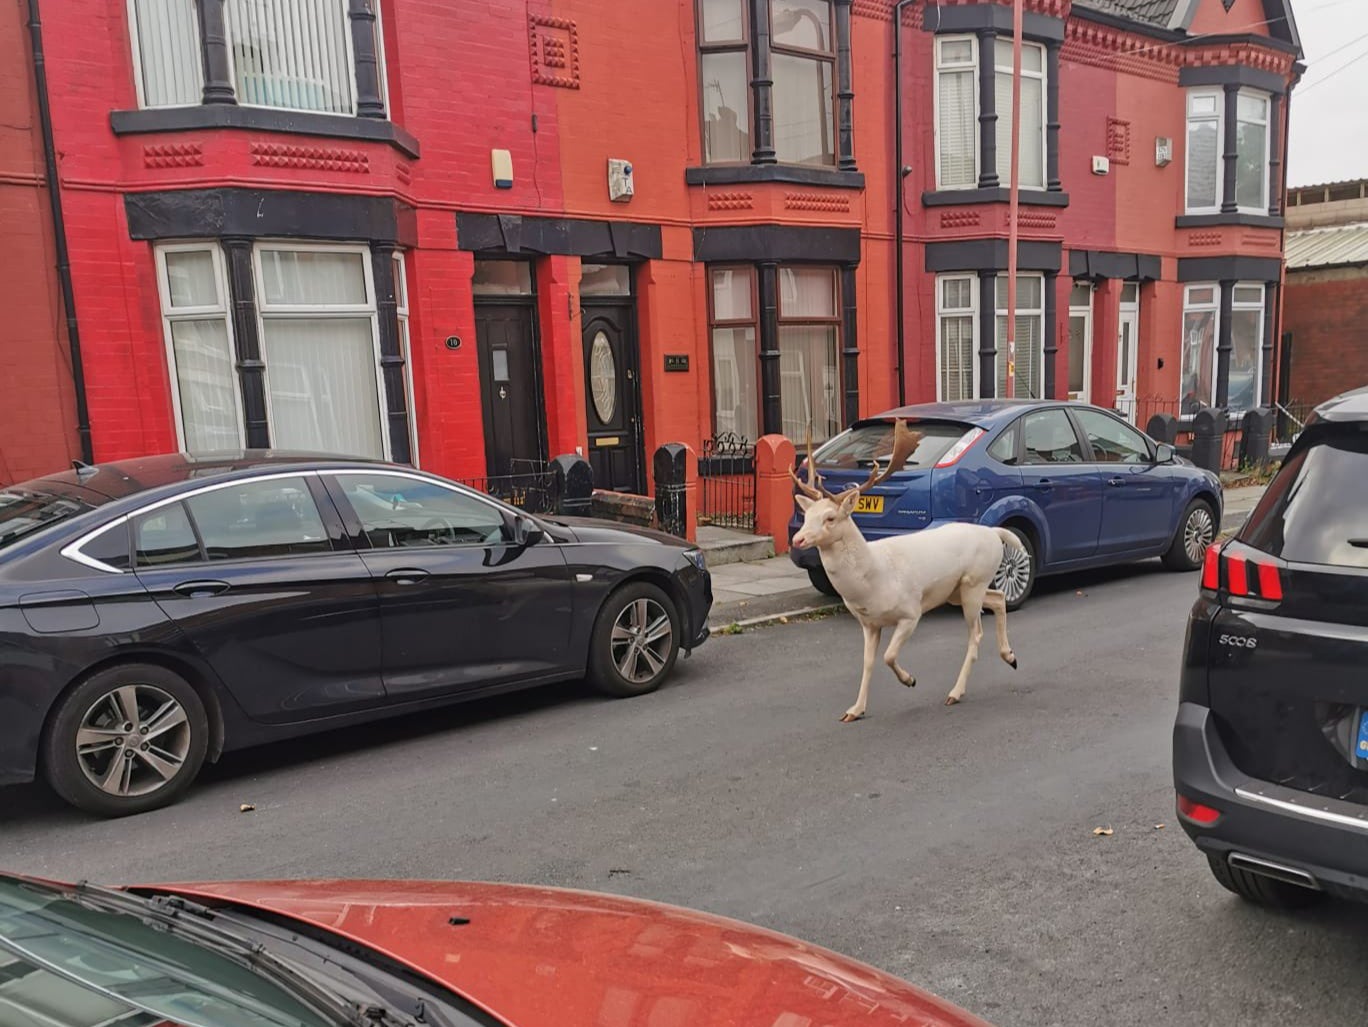 The rare beast running through the streets shocked residents of Bootle